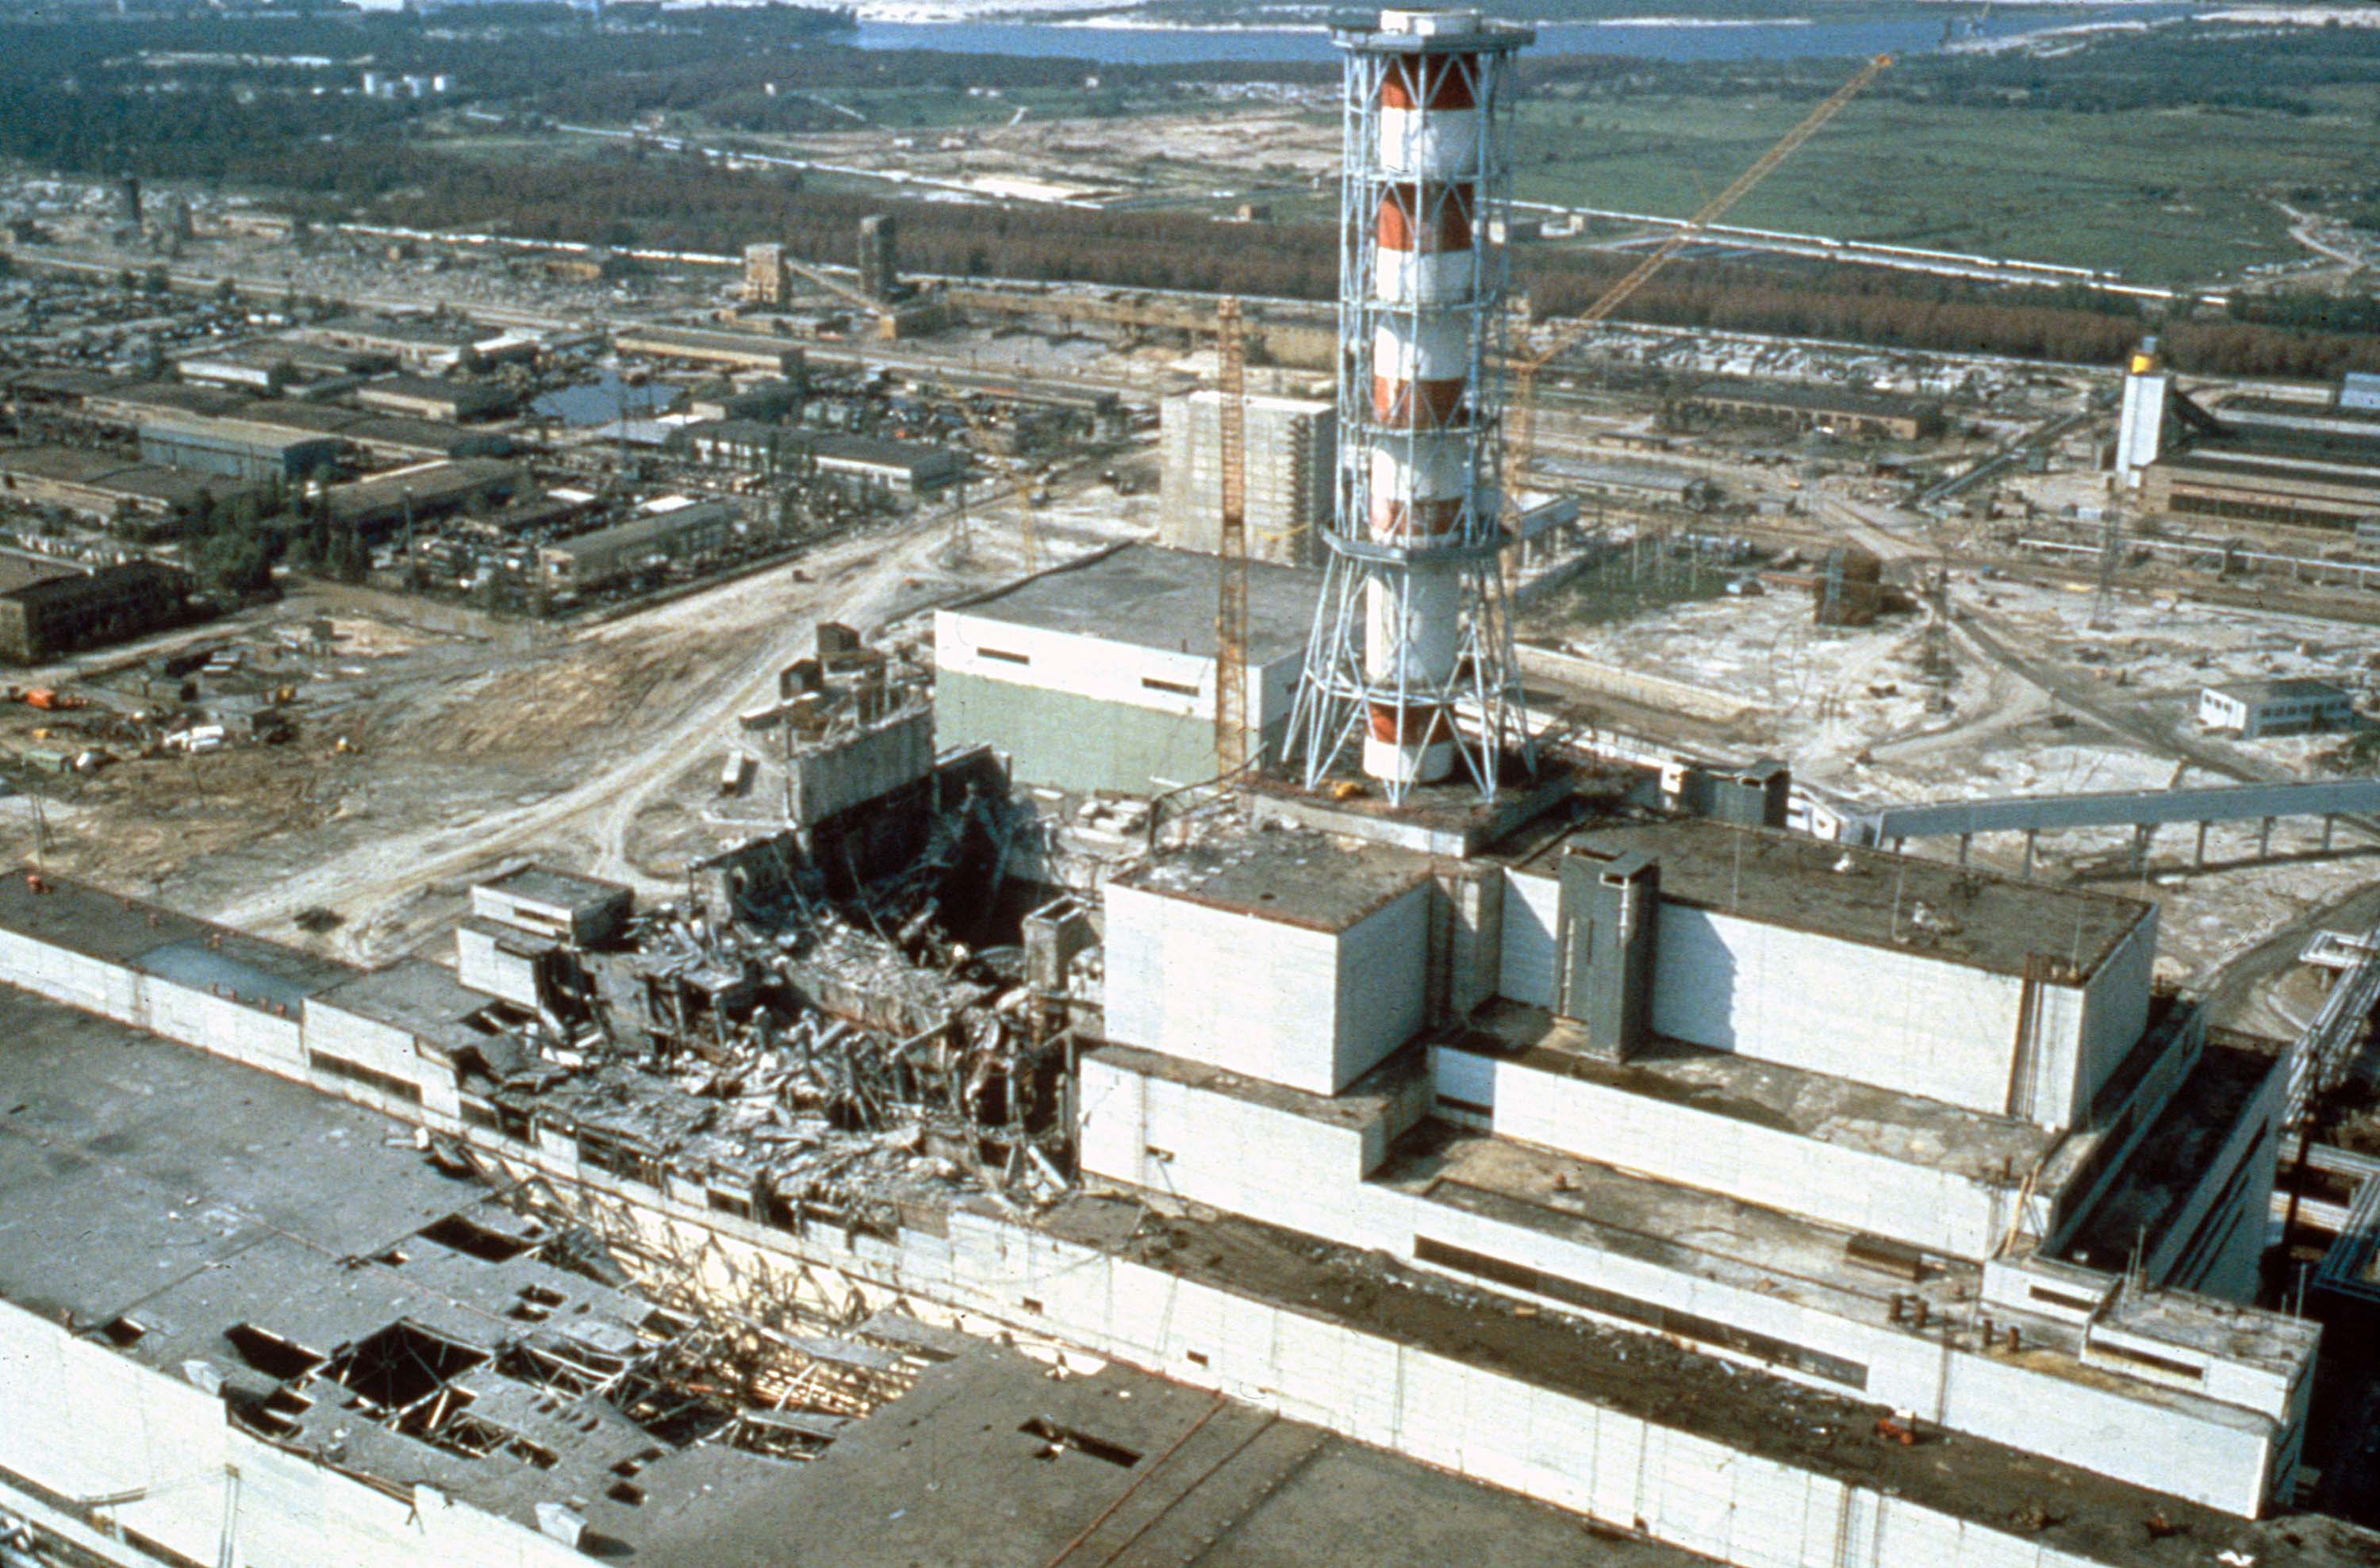 The Chernobyl nuclear power plant is pictured a few weeks after the disaster occurred, in May 1986.